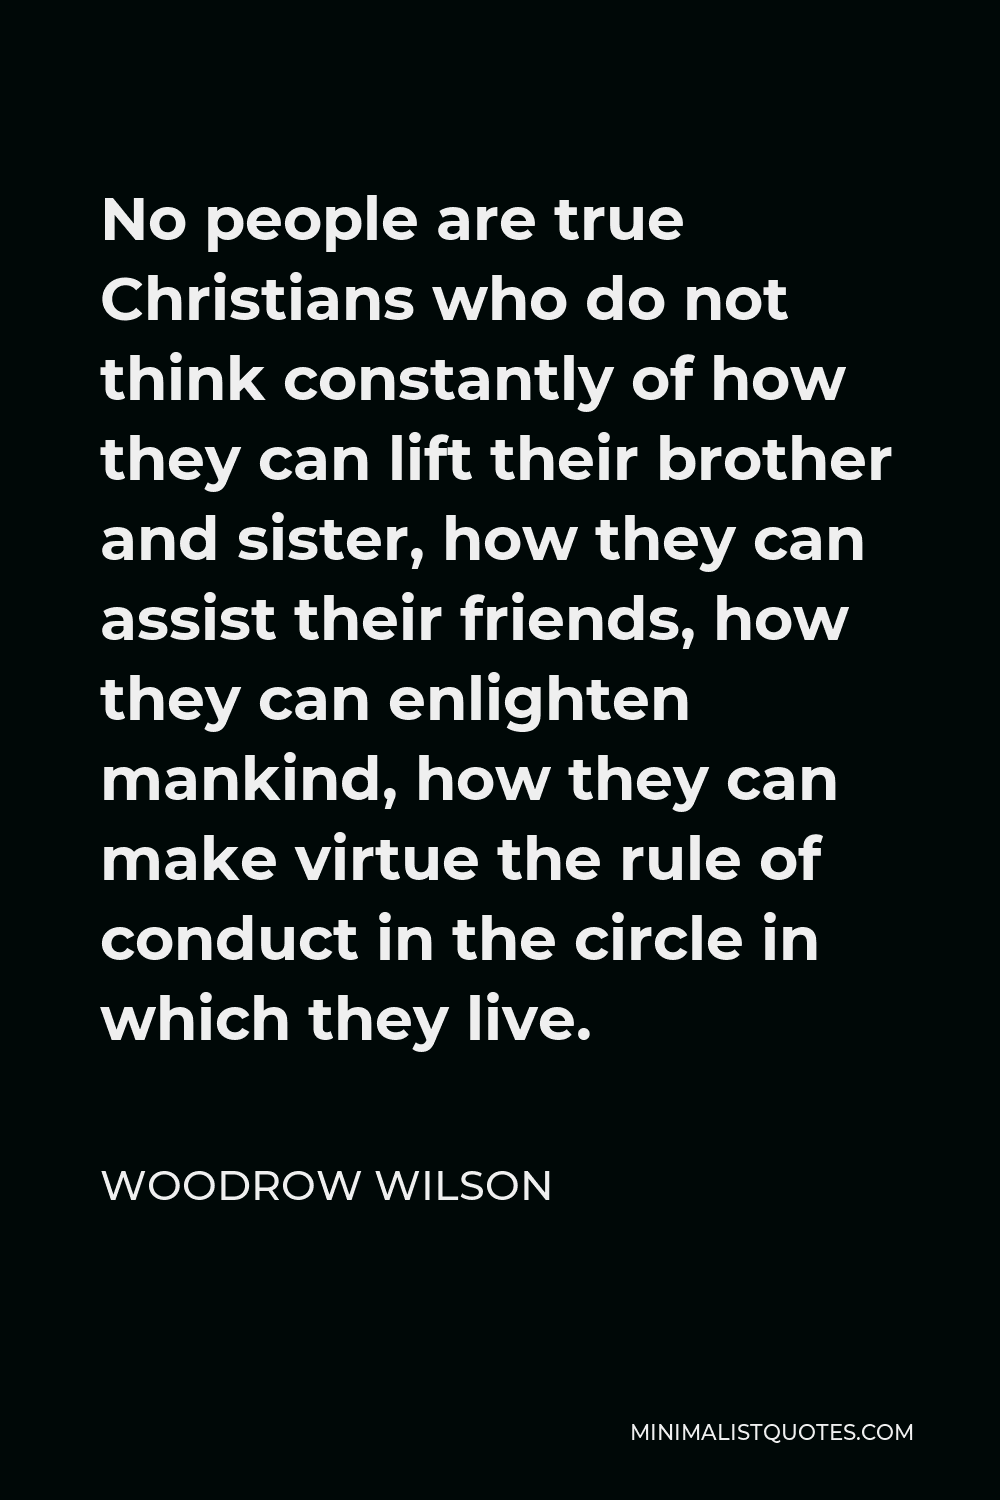 Woodrow Wilson Quote - No people are true Christians who do not think constantly of how they can lift their brother and sister, how they can assist their friends, how they can enlighten mankind, how they can make virtue the rule of conduct in the circle in which they live.